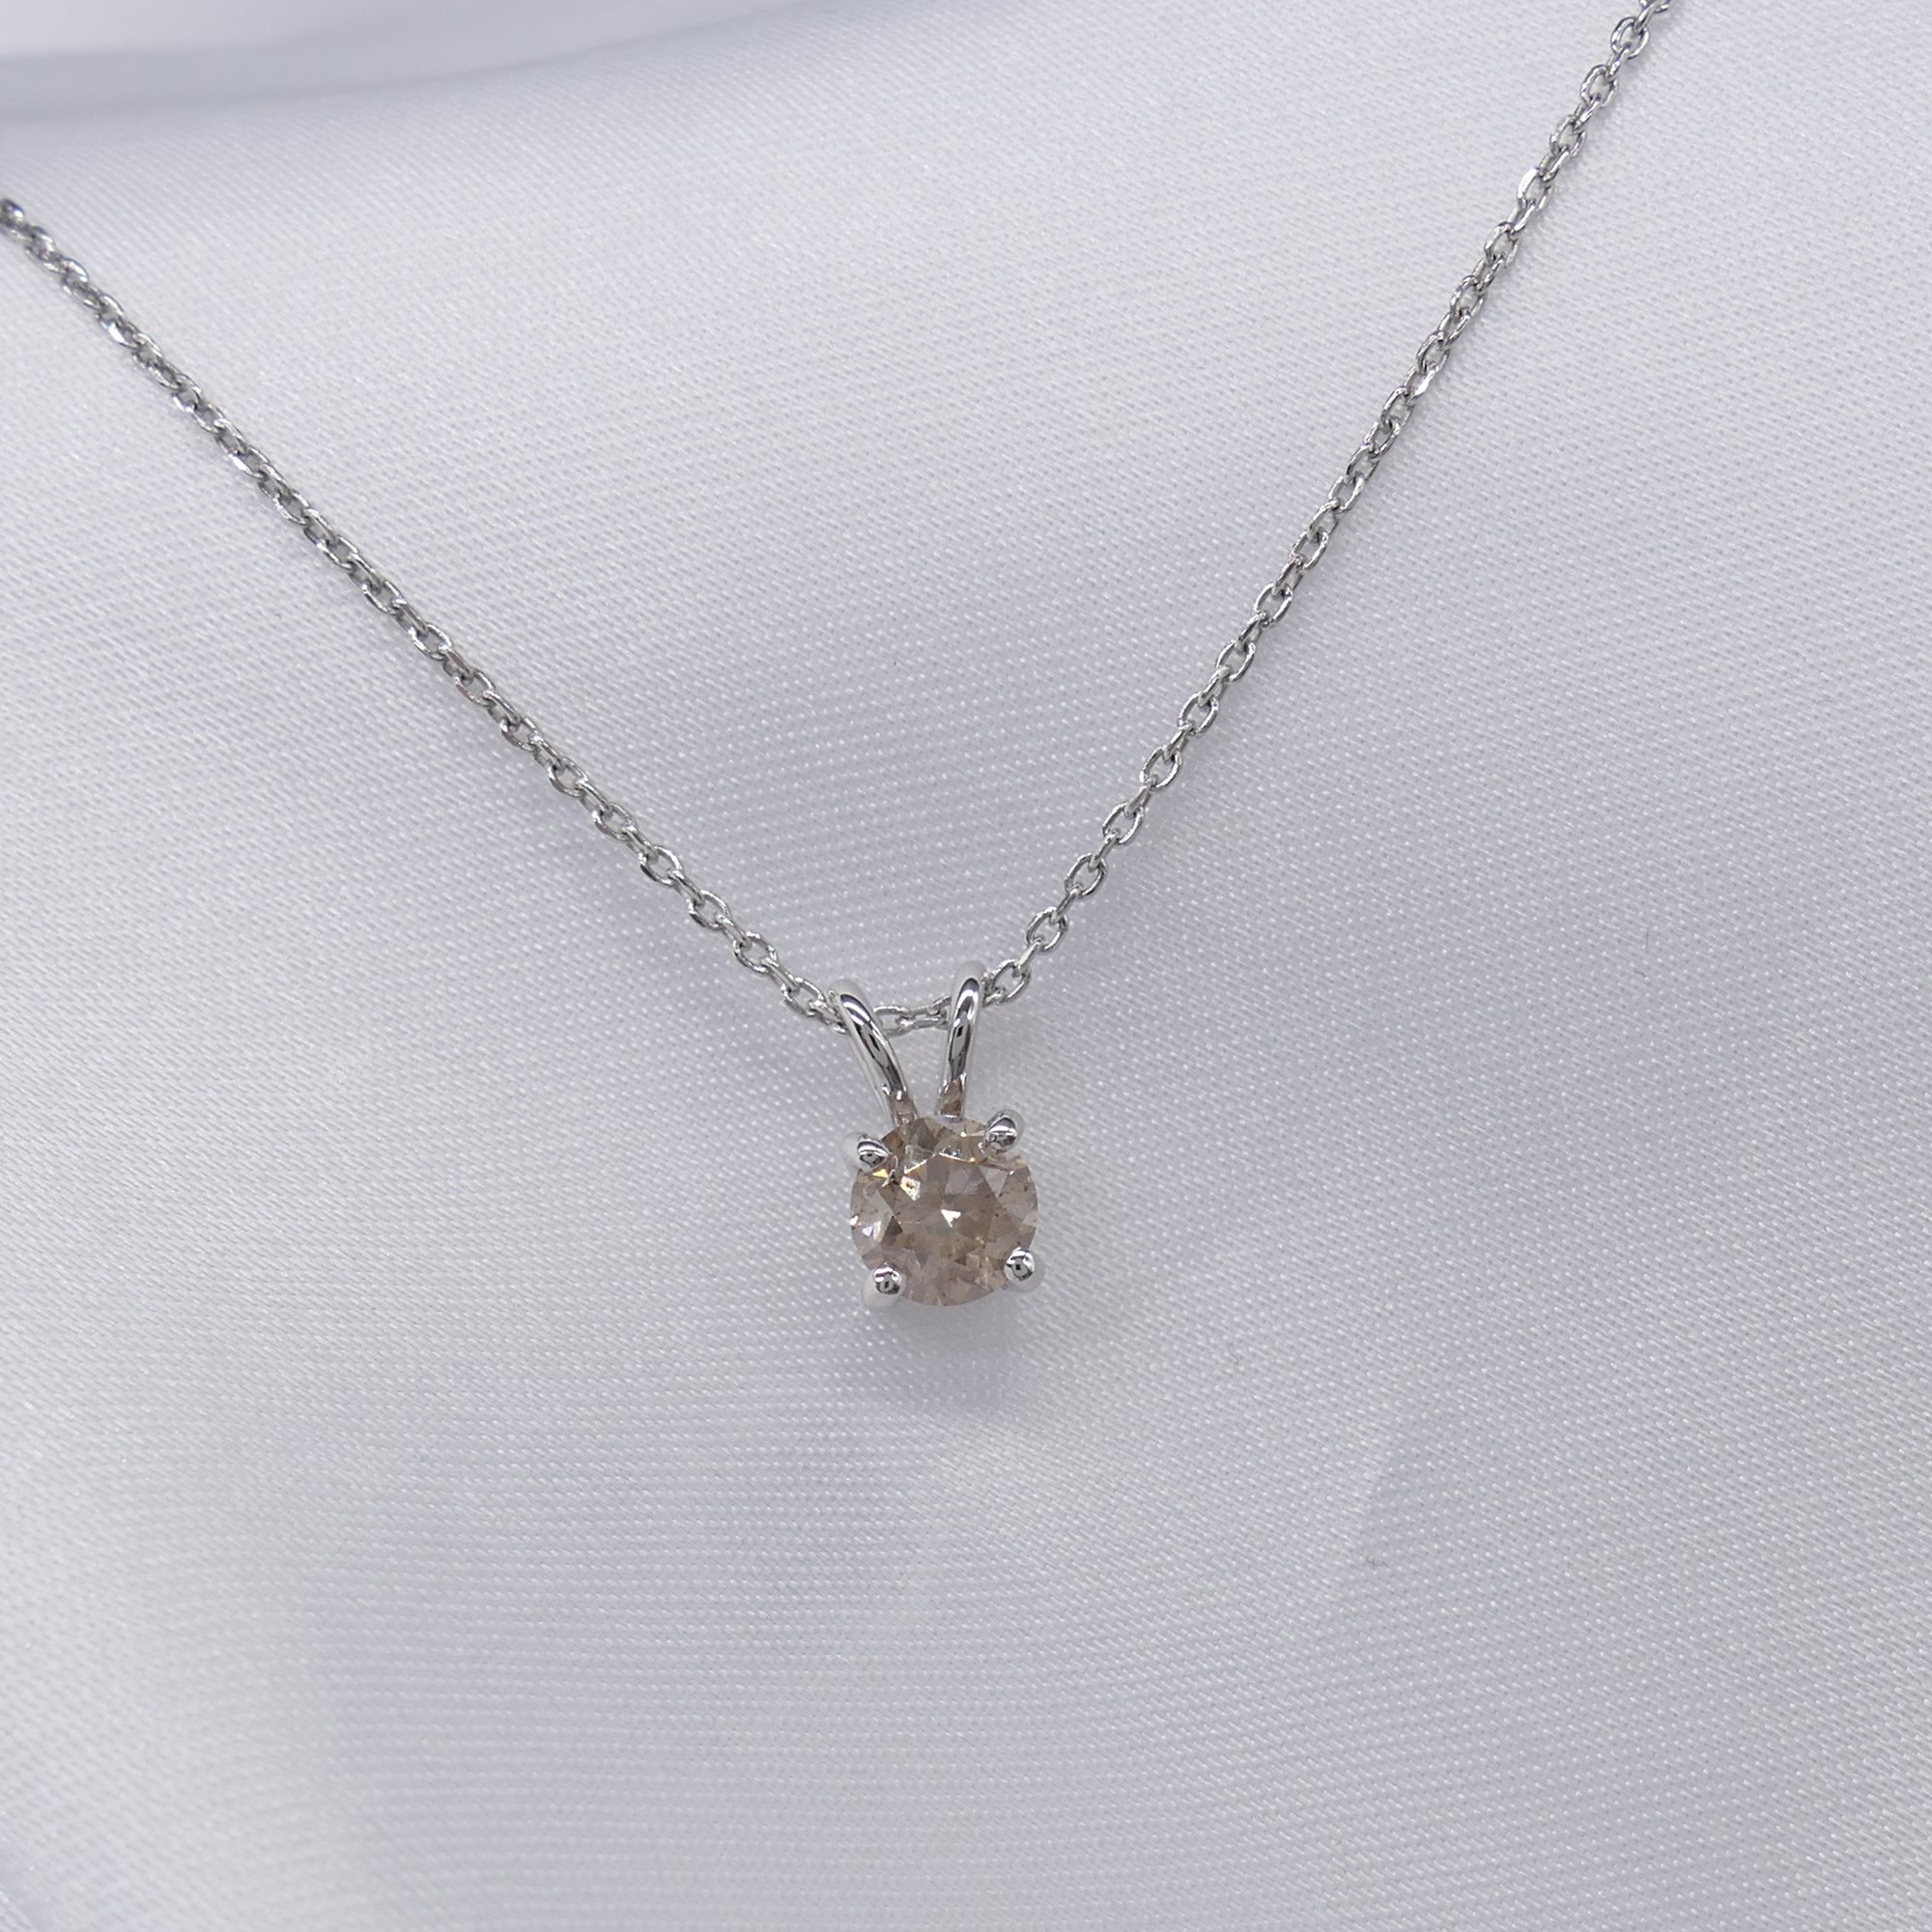 18ct White Gold 0.74 Carat Diamond Solitaire Pendant With Chain, Boxed - Image 6 of 7